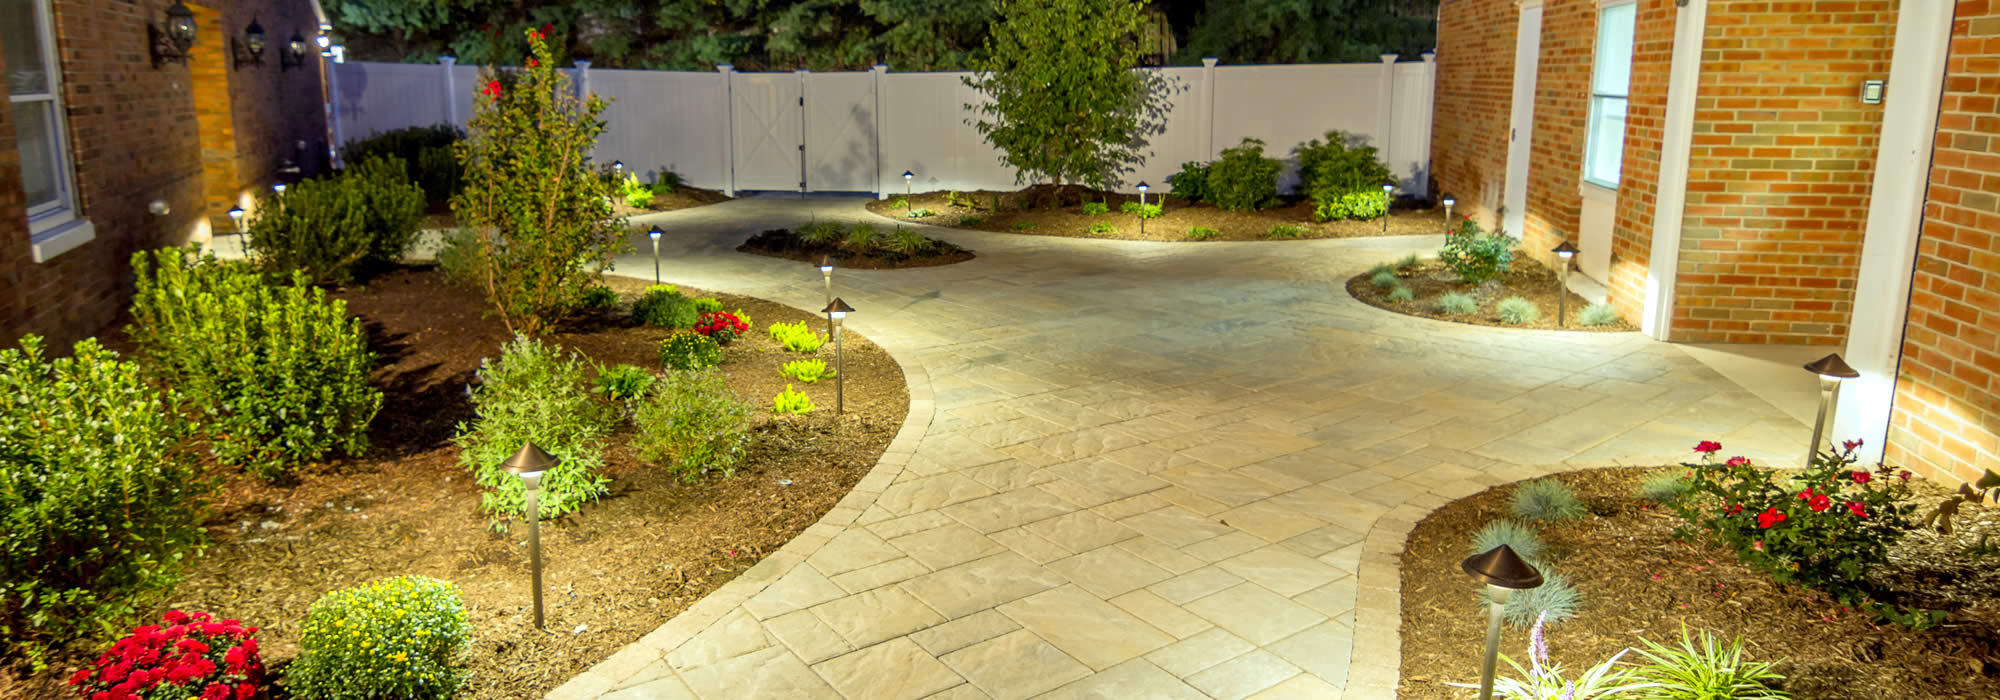 Landscaping Services in Verona